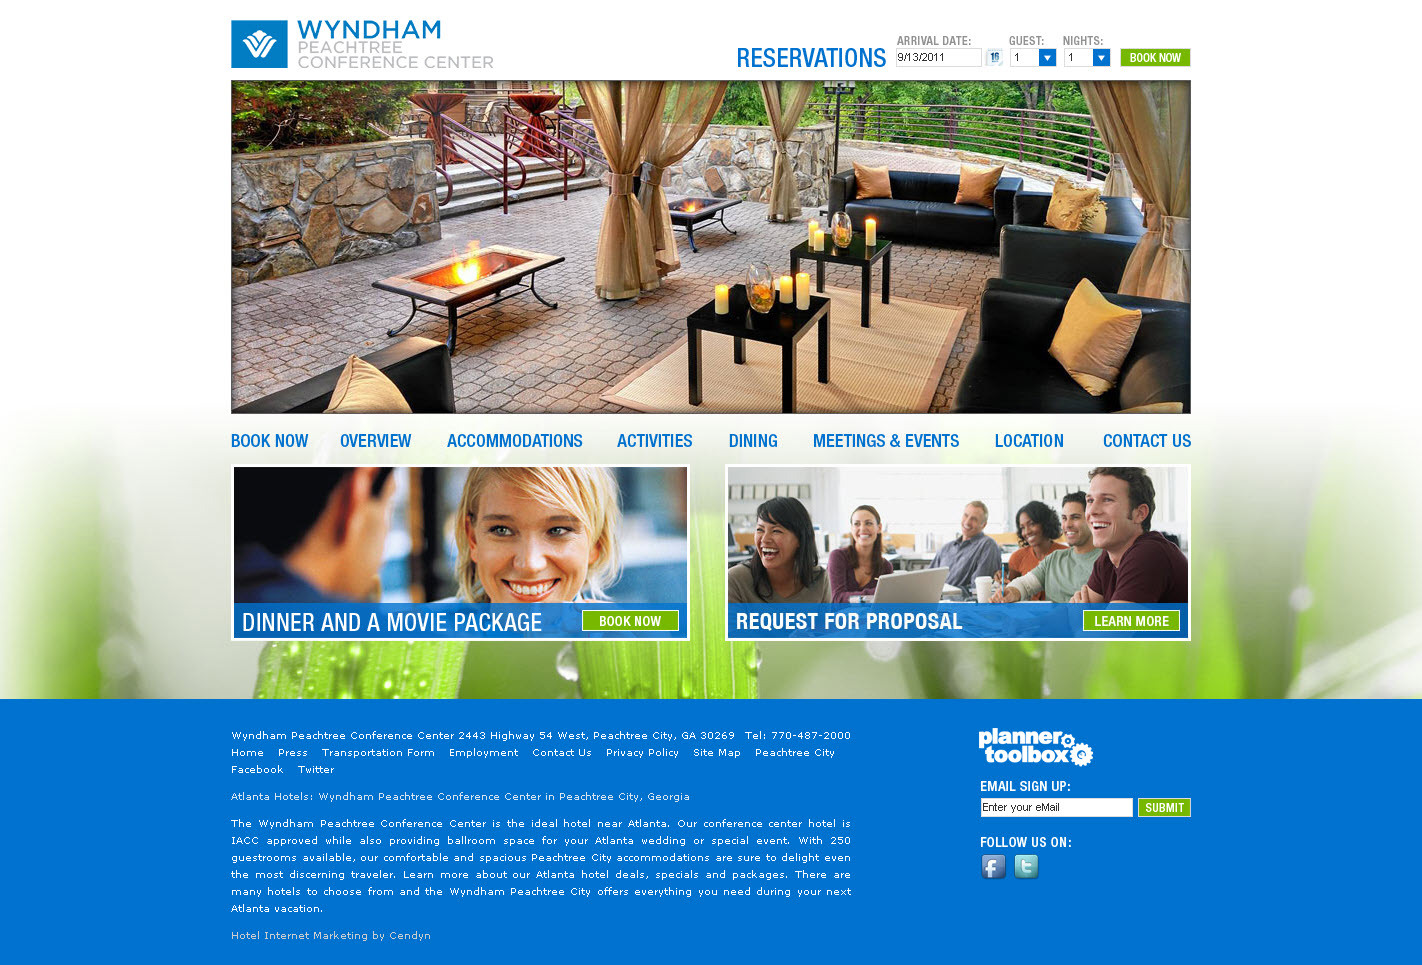 Wyndham Peachtree Conference Center image